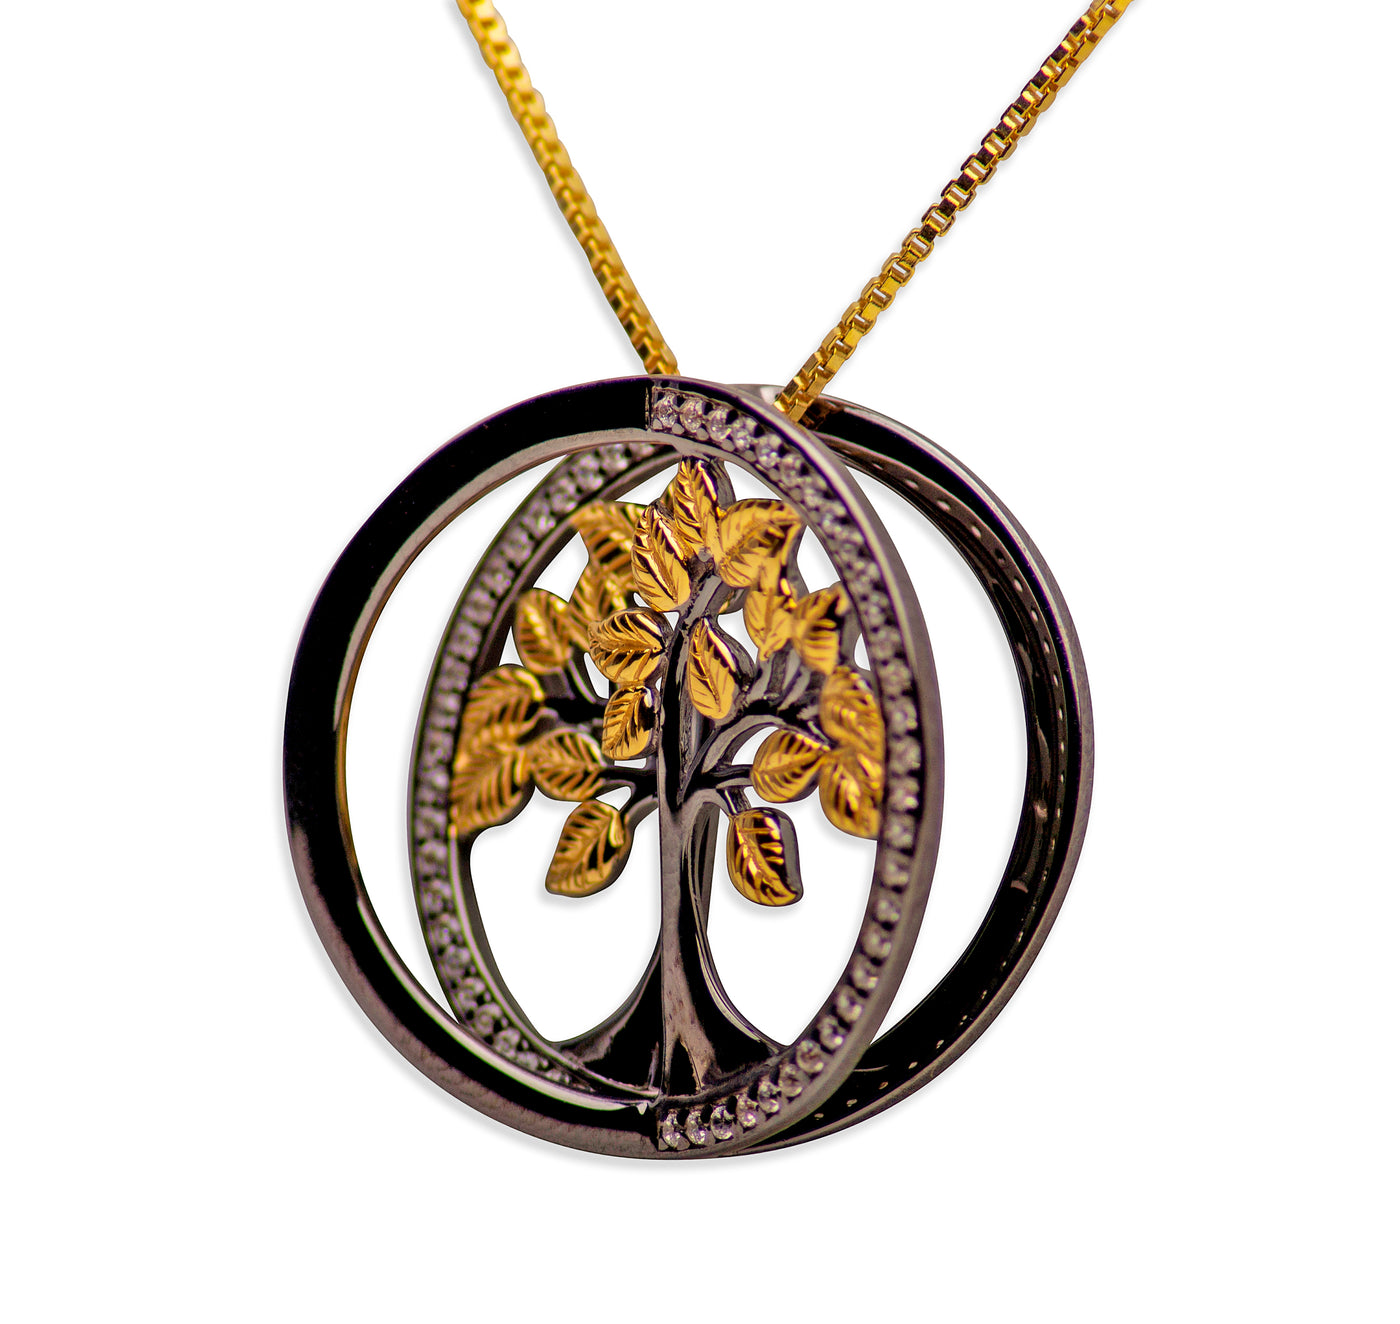 14K Gold Plated Black Sterling Silver 3D Tree of Life Pendant Necklace